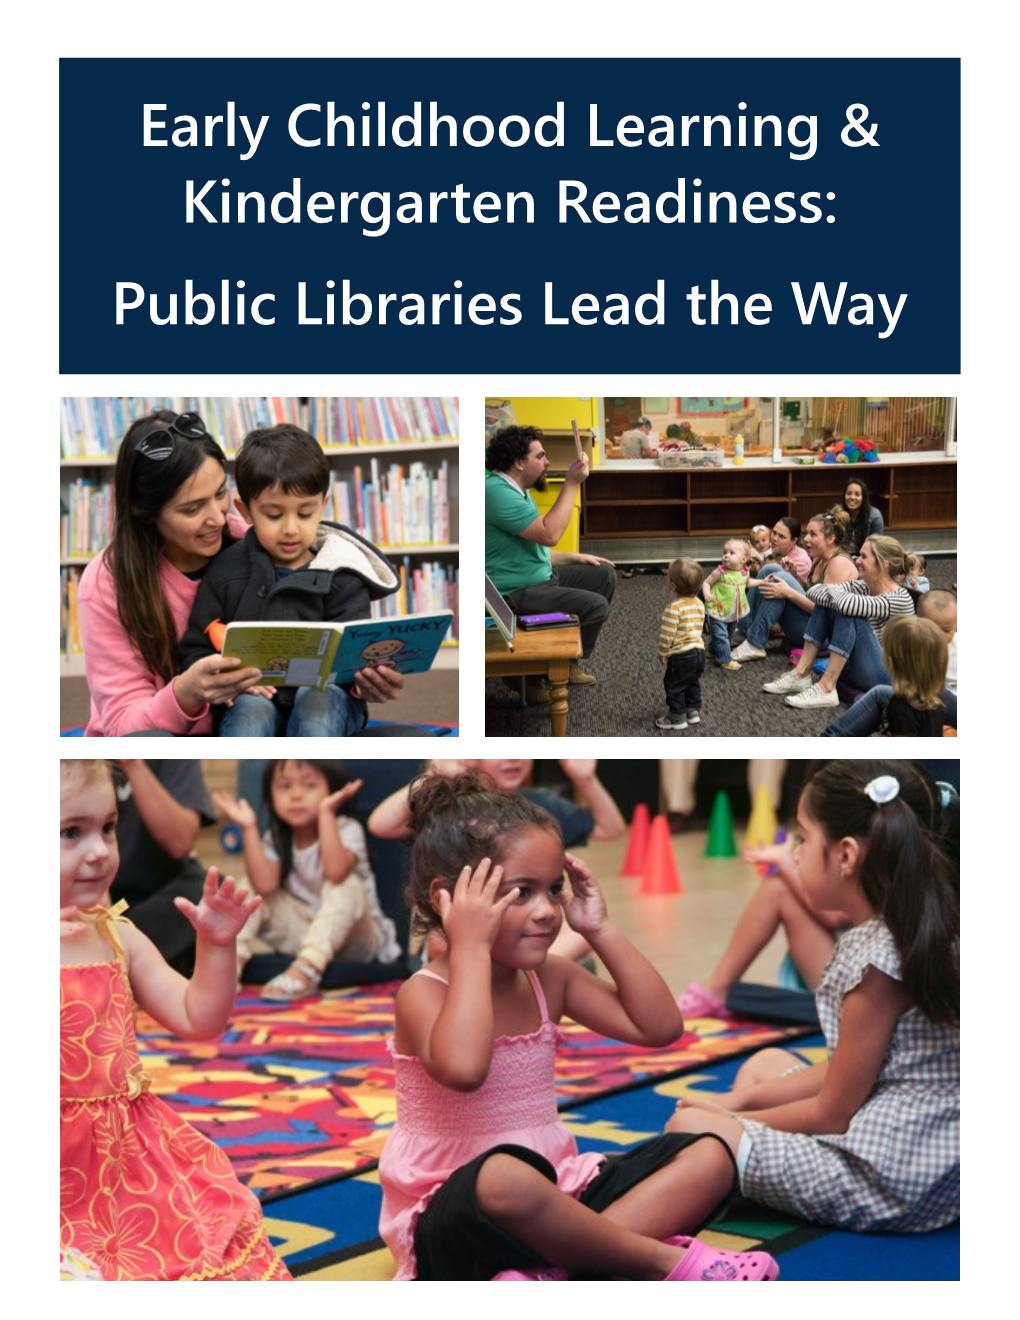 Early Childhood “Public Libraries Lead the Way”